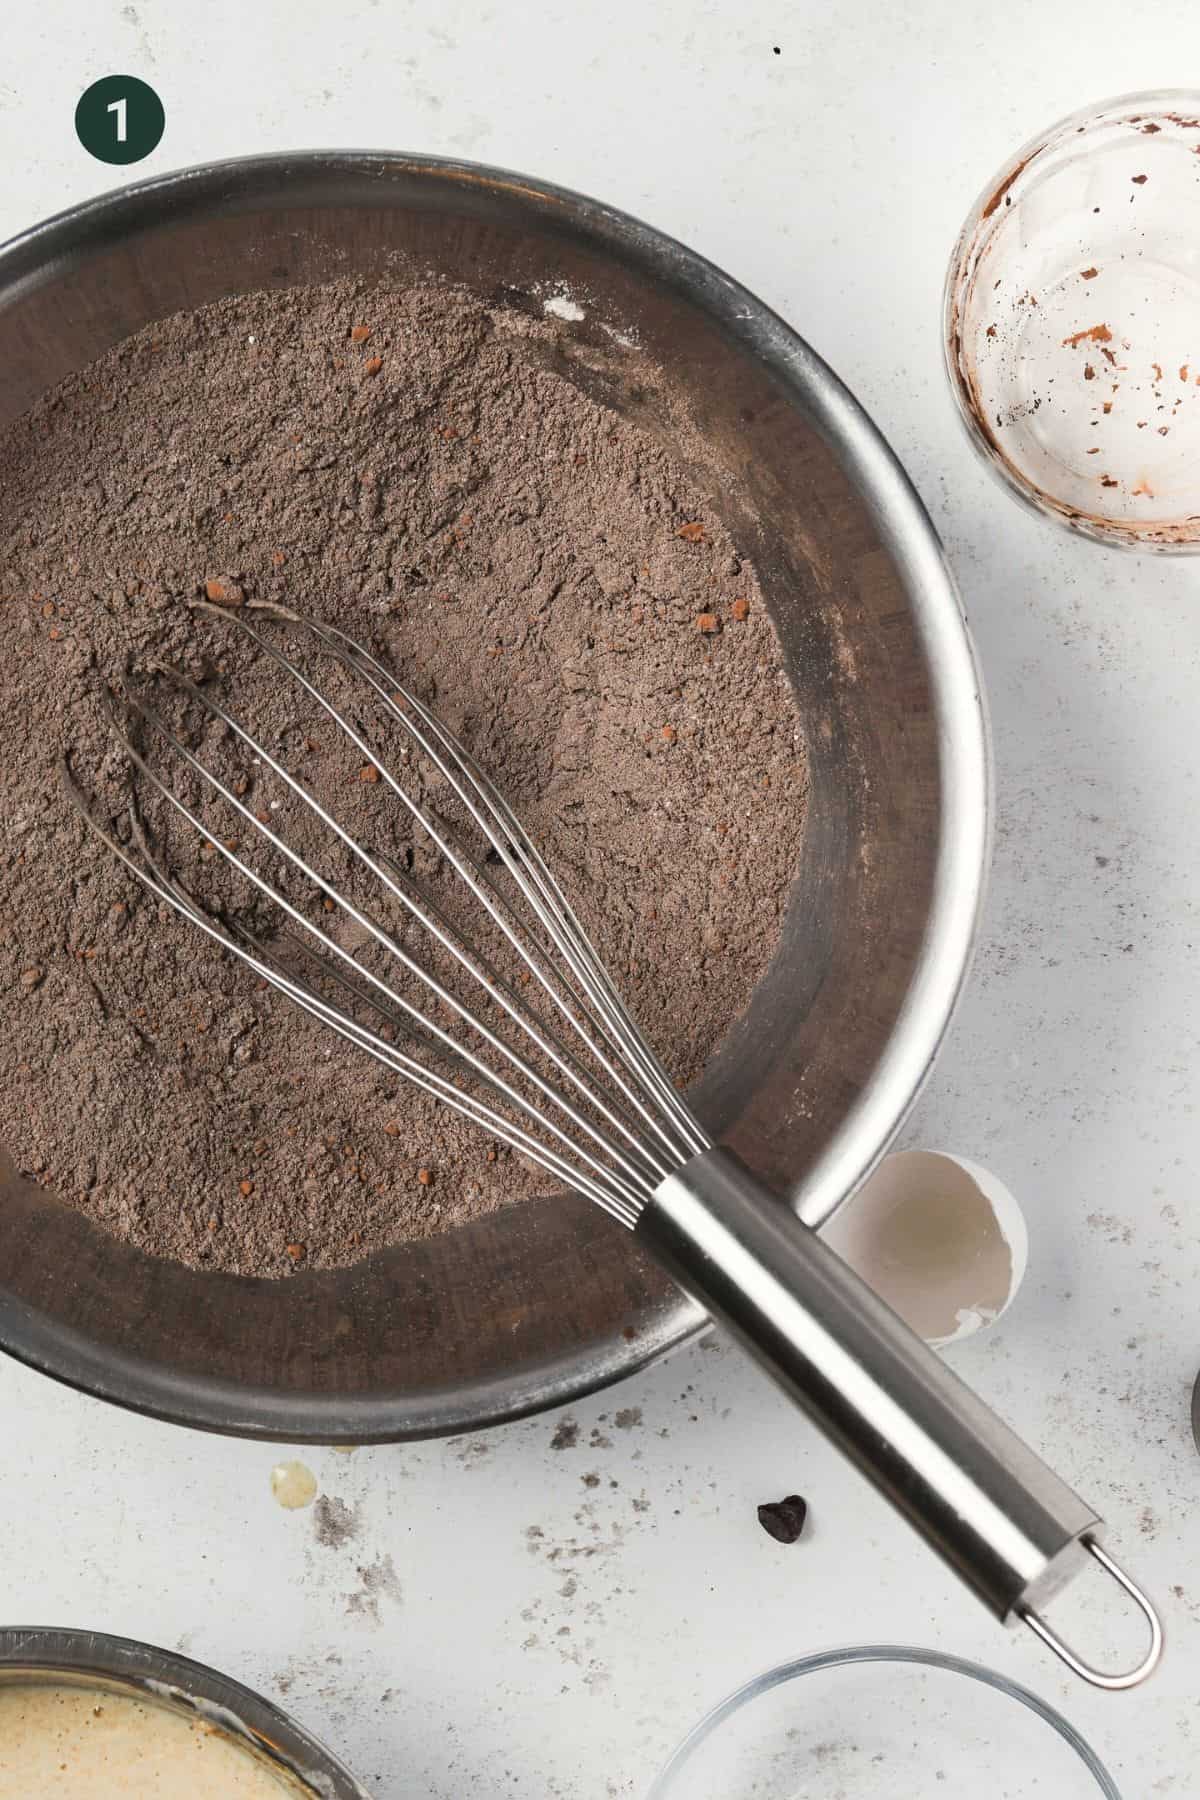 Cocoa powder, sugar, flour, baking soda and powder and salt combined in a mixing bowl.